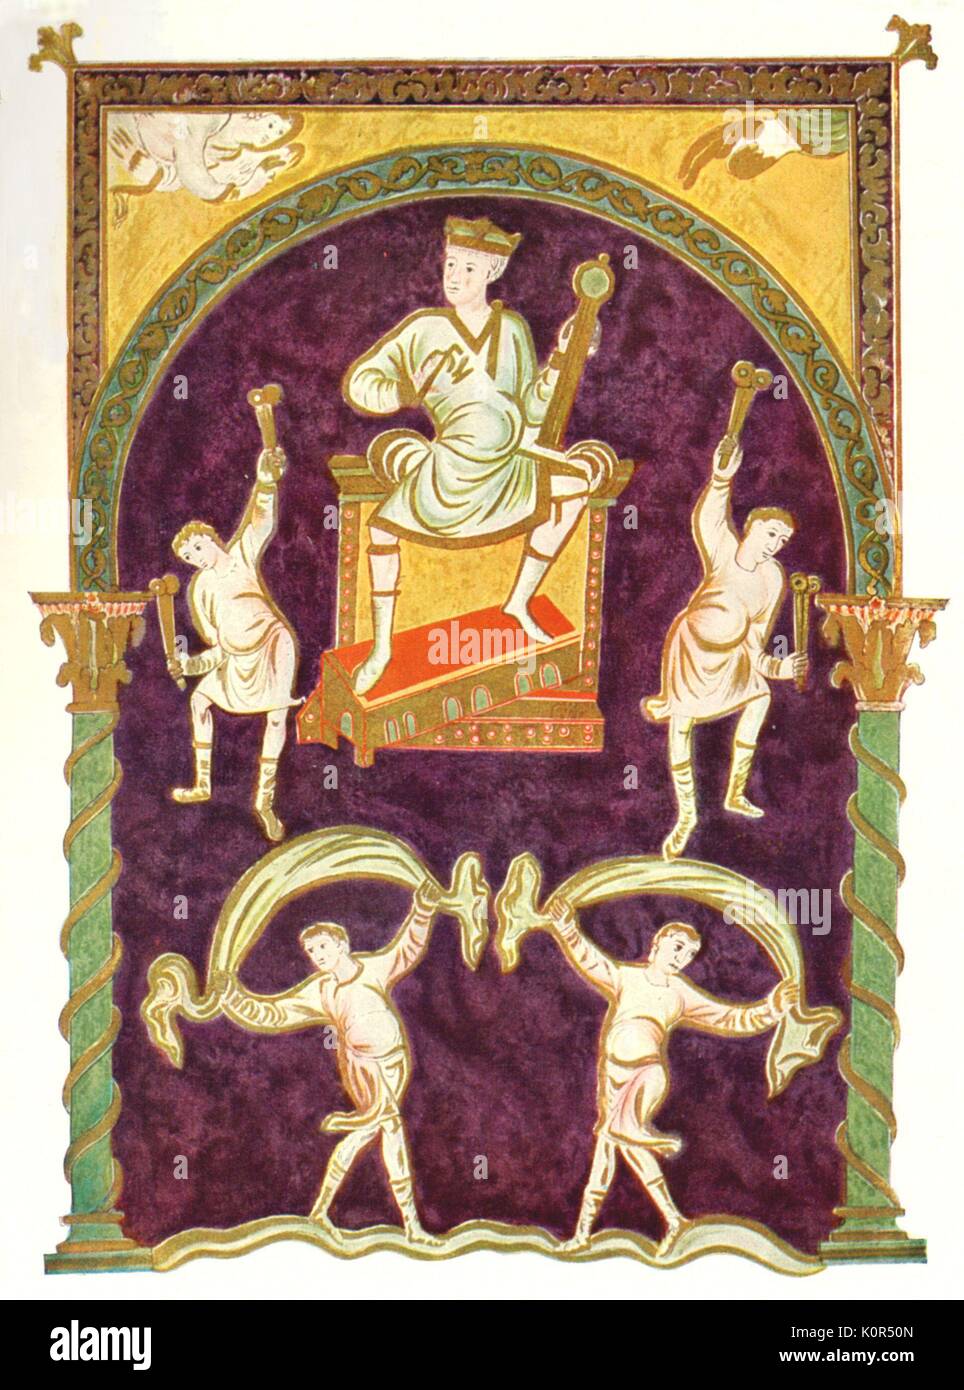 King David playing a stringed instrument; musicians with drums and dancers. From 9th century Psalterium in St Gallen. Stock Photo